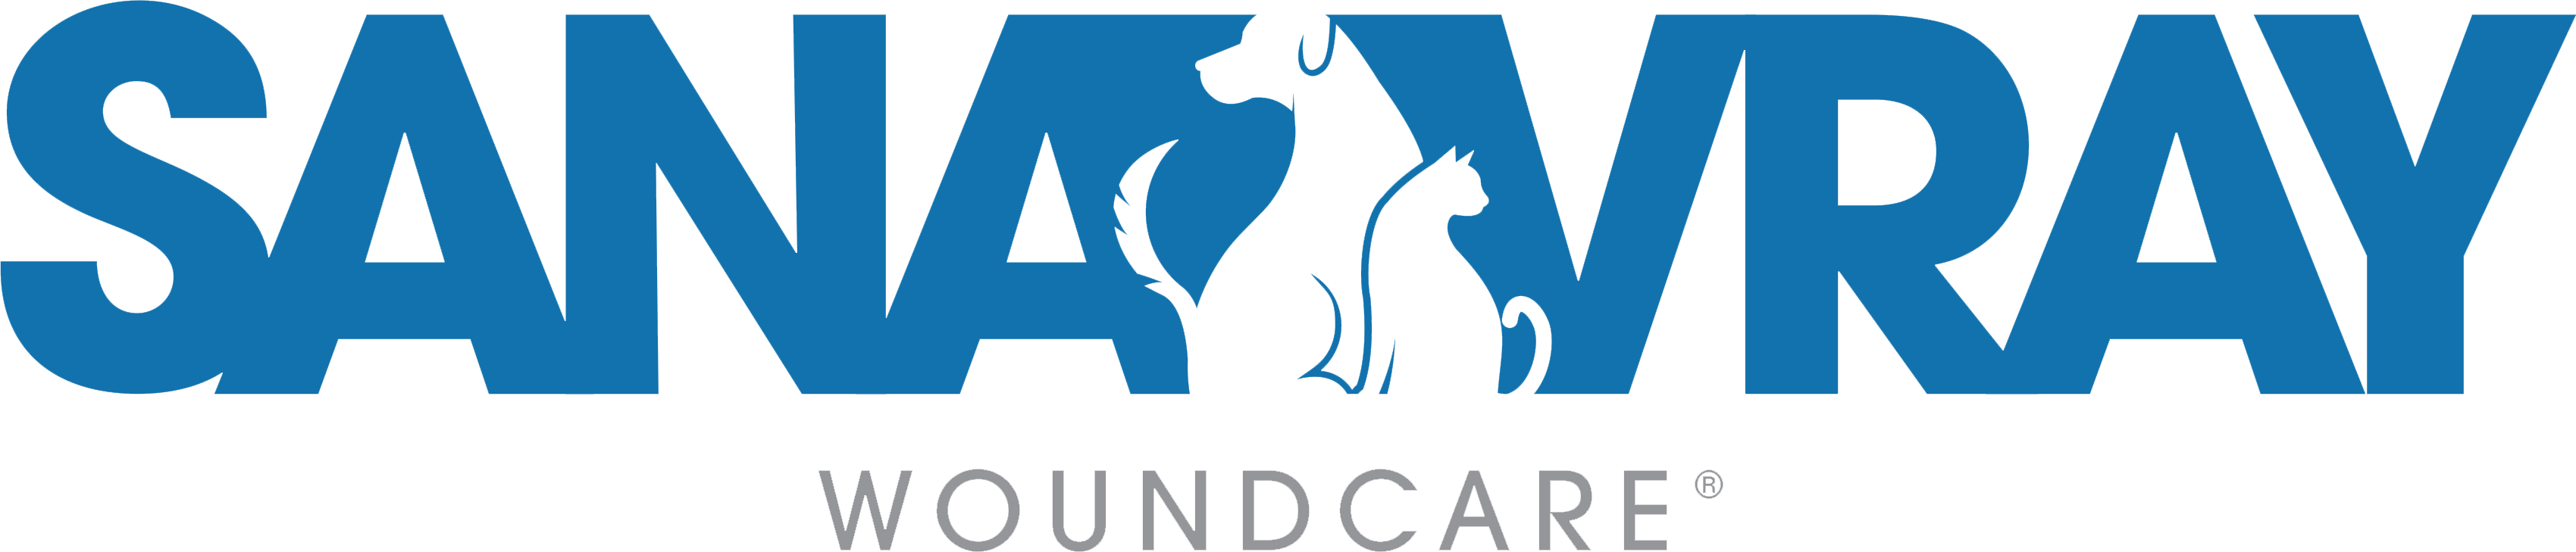 Sanavray woundcare product for pet and animal - logo